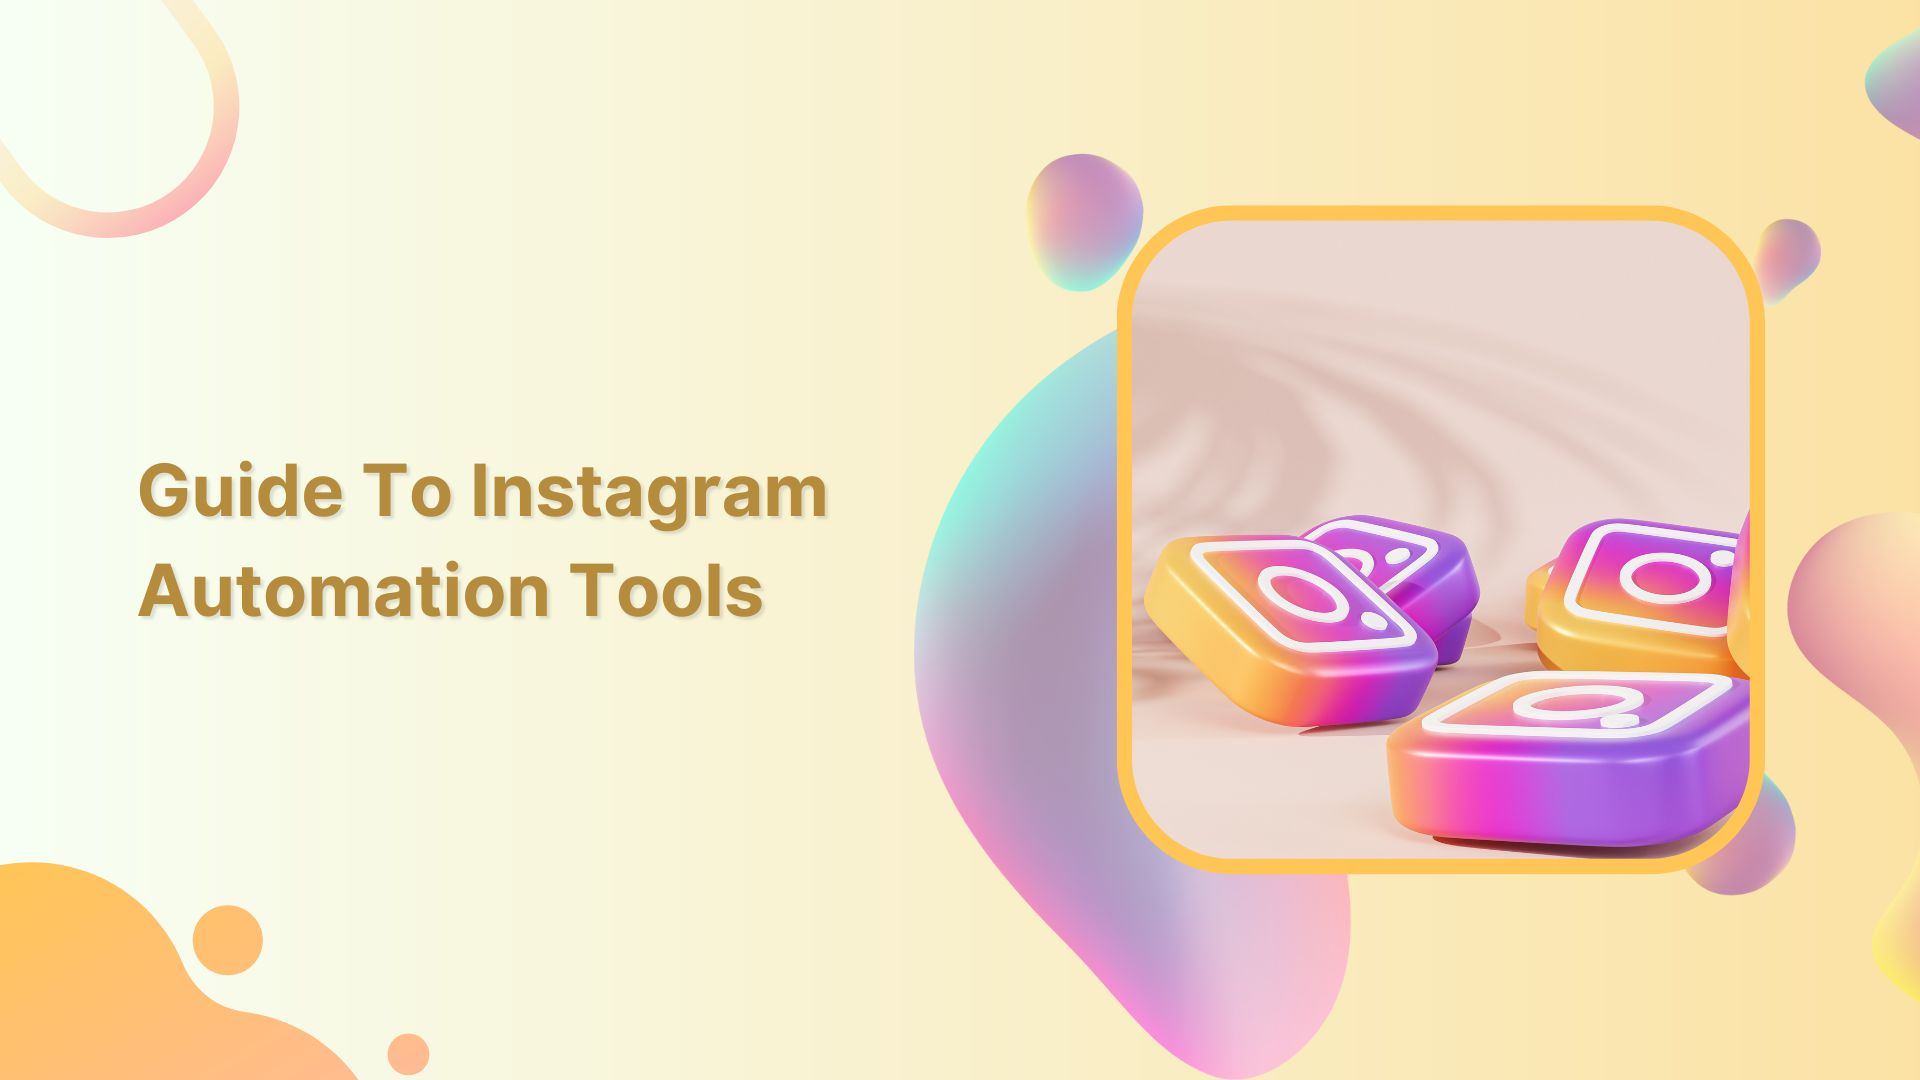 Guide to Instagram automation tools